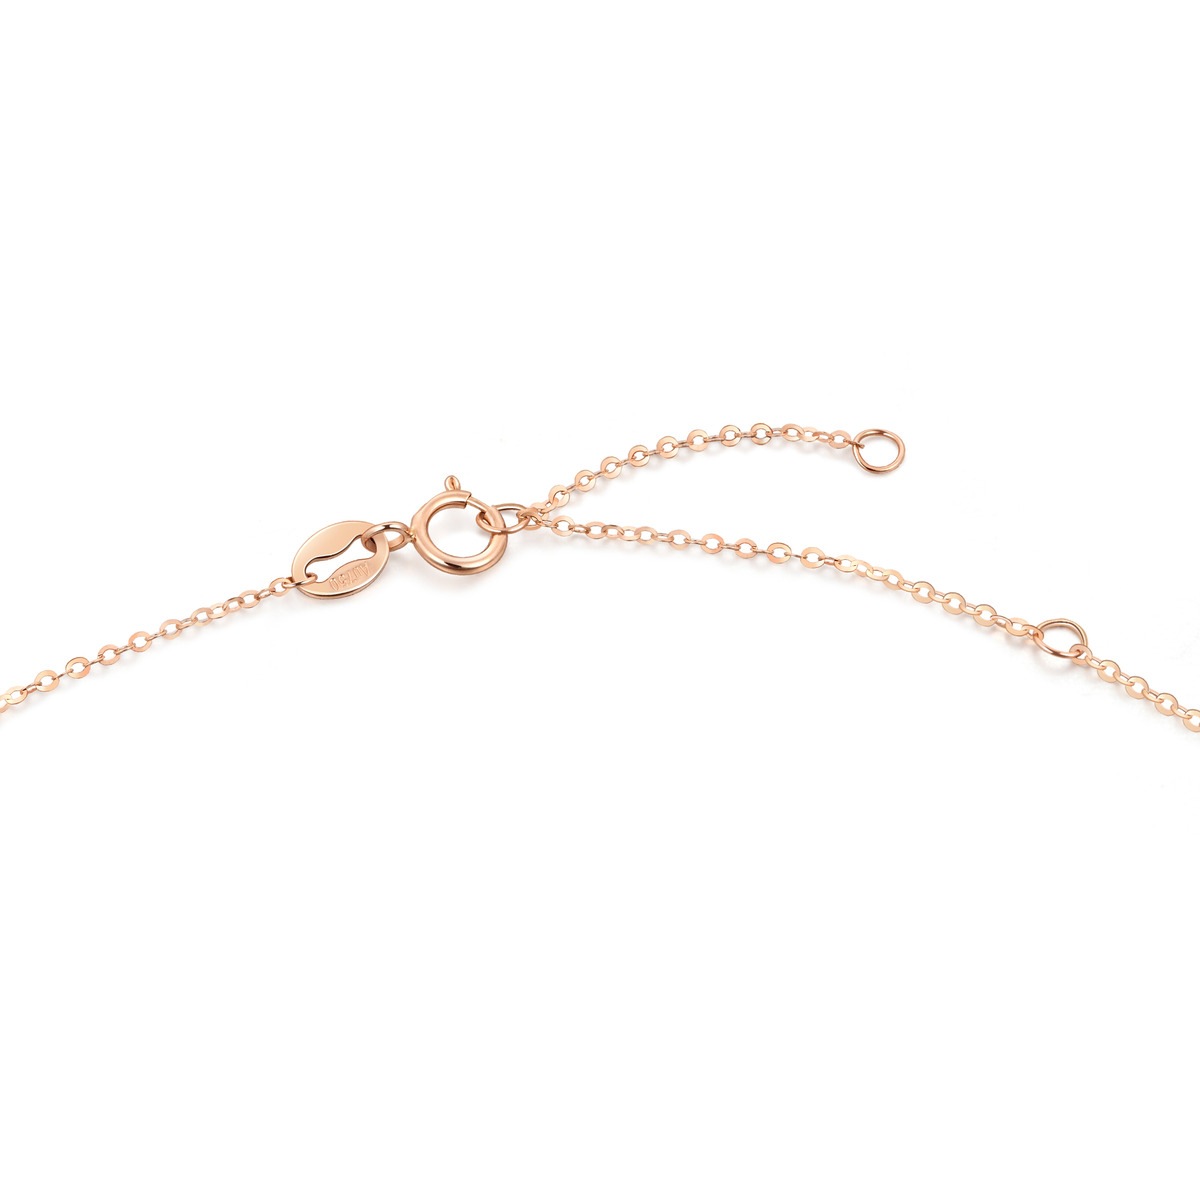 Minty Collection 18K Rose Gold Necklace - 91977N | Chow Sang Sang Jewellery